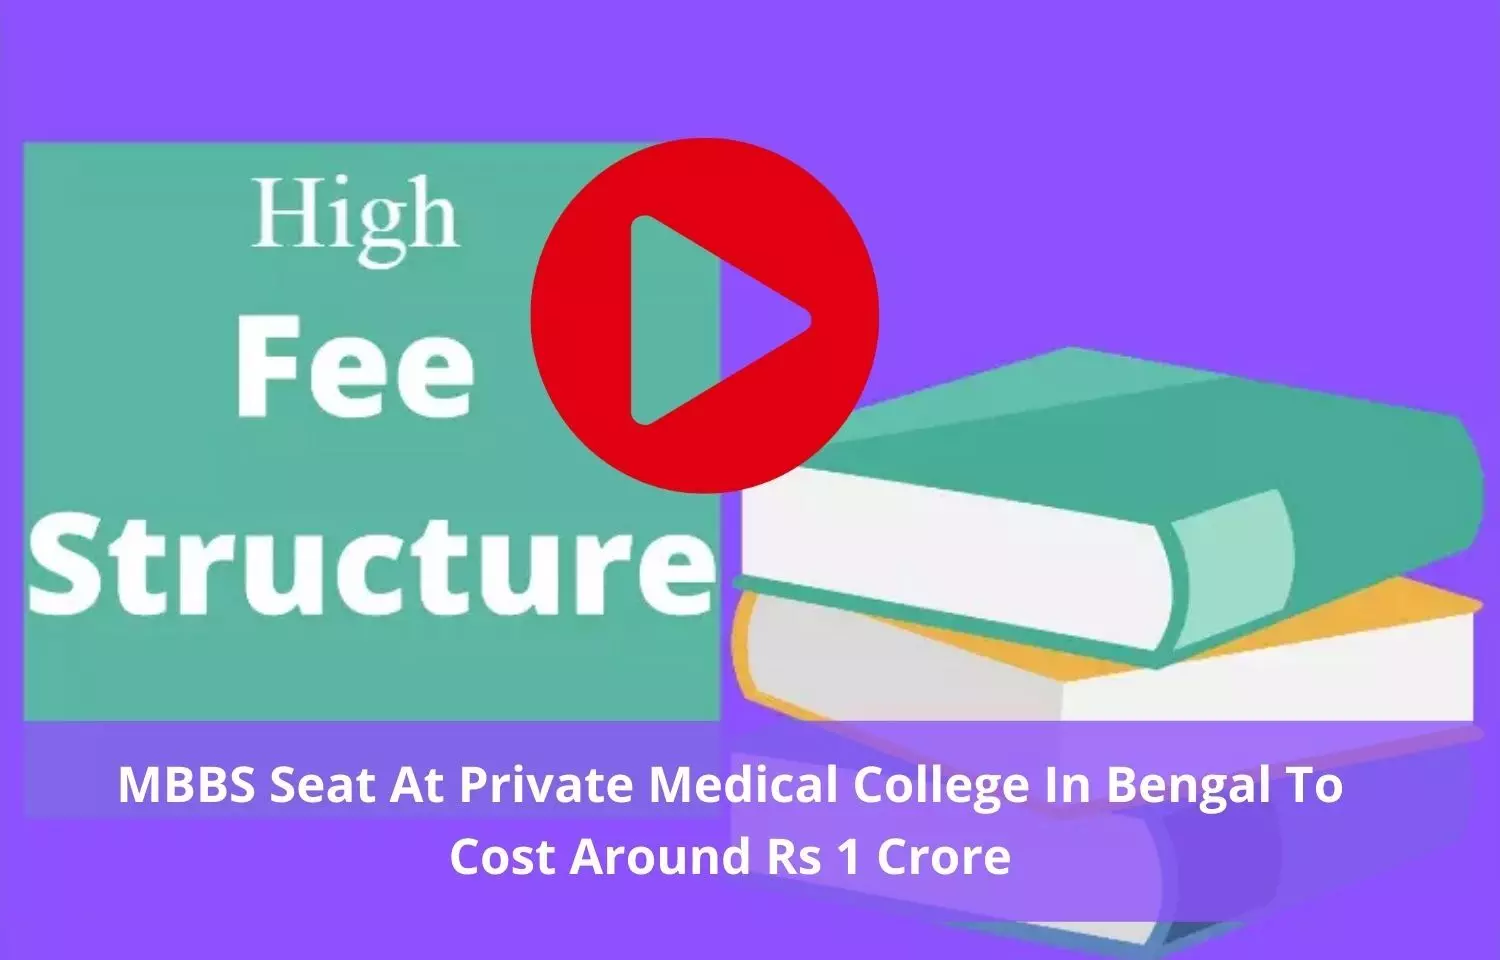 Whooping Rs 1 crore MBBS fee at Bengal medical colleges